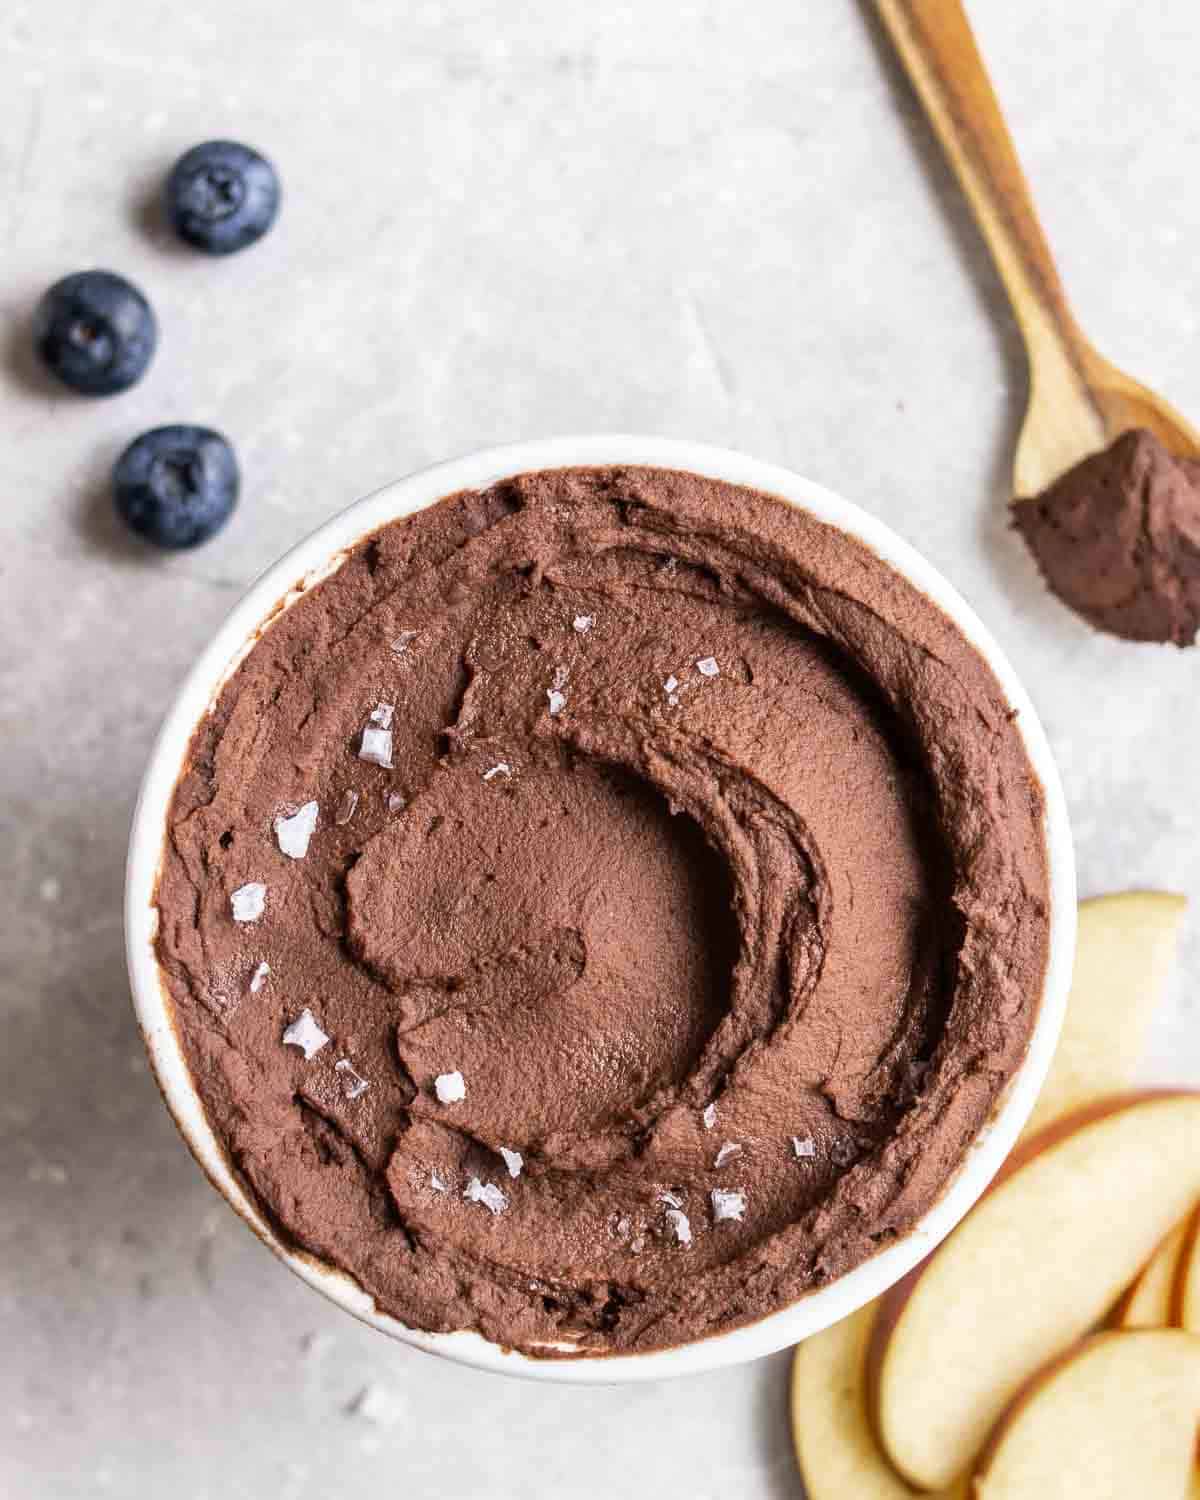 Chocolate hummus in a bowl with sliced apple and blueberries.